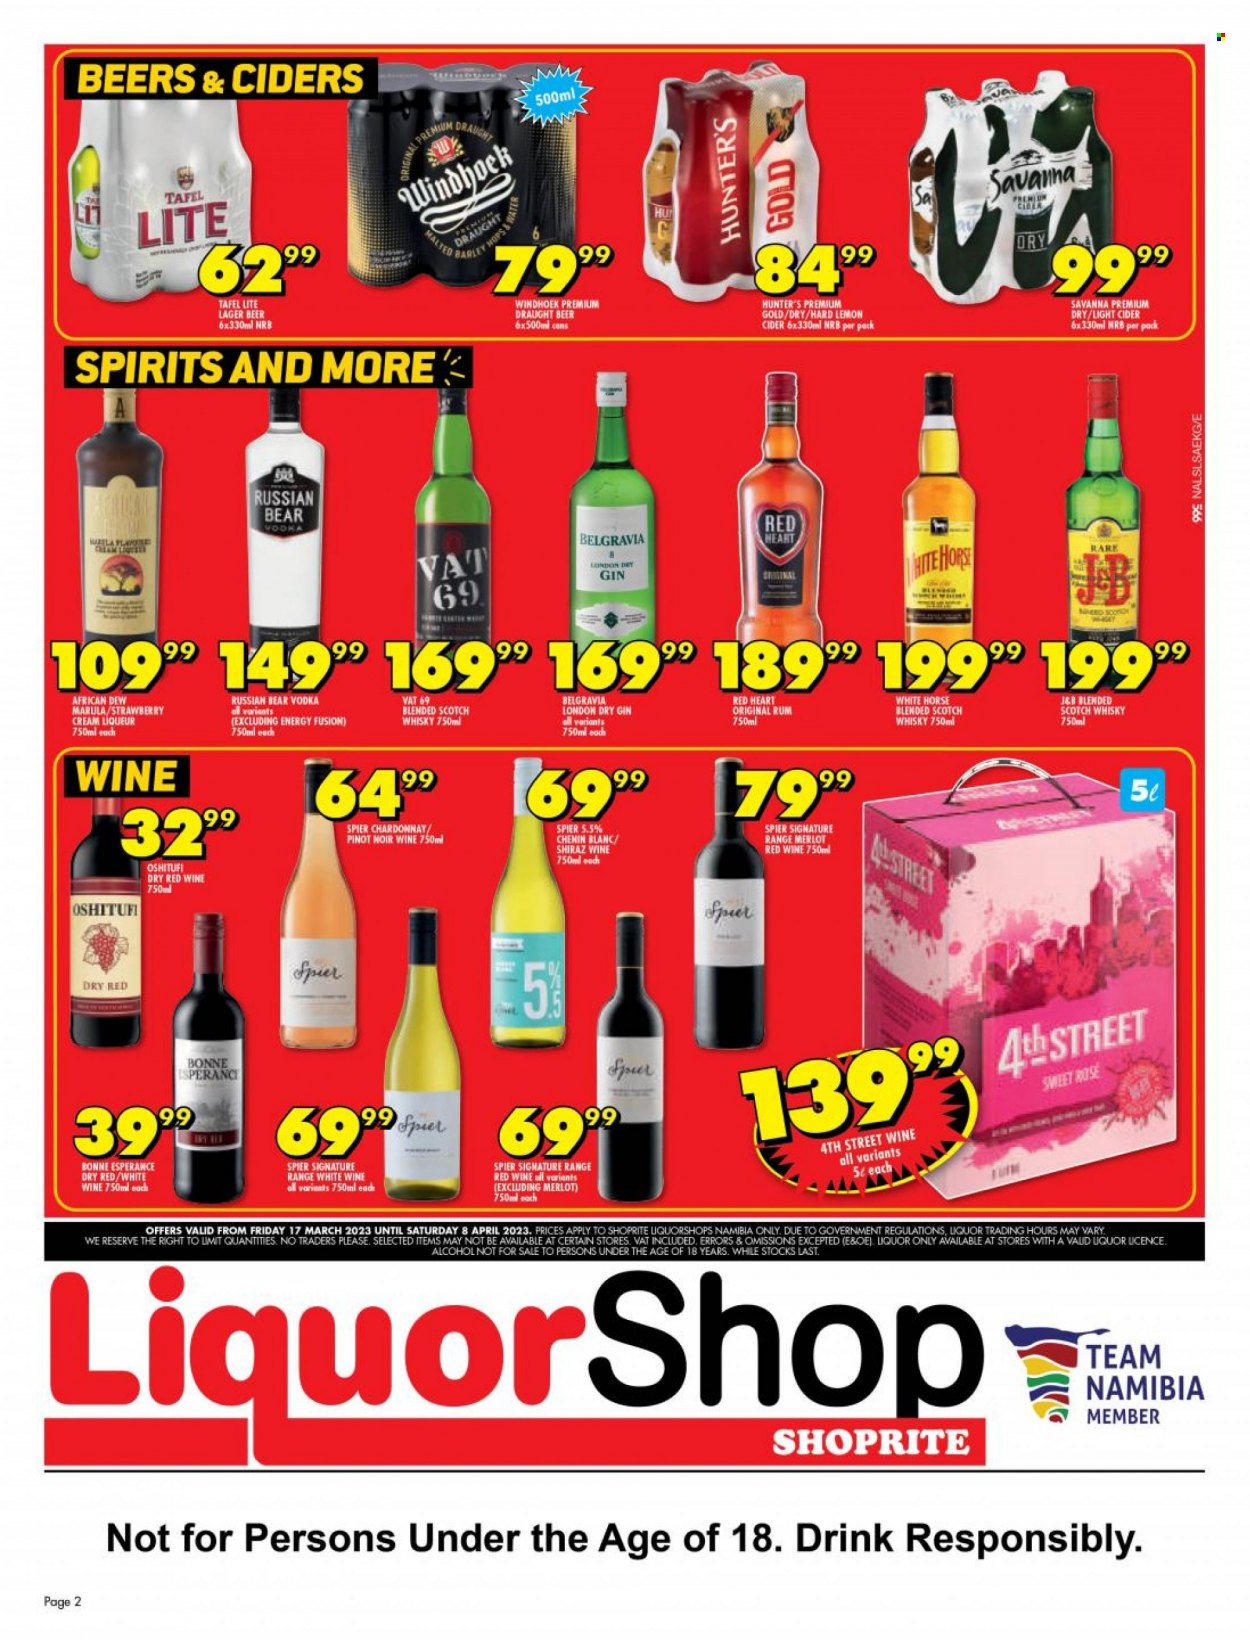 thumbnail - Shoprite catalogue  - 17/03/2023 - 08/04/2023 - Sales products - red wine, white wine, Chardonnay, wine, Merlot, Pinot Noir, alcohol, Chenin Blanc, Shiraz, rosé wine, gin, liqueur, rum, vodka, liquor, Russian Bear, Red Heart, Vat 69, Belgravia, scotch whisky, whisky, cider, beer, Lager. Page 2.